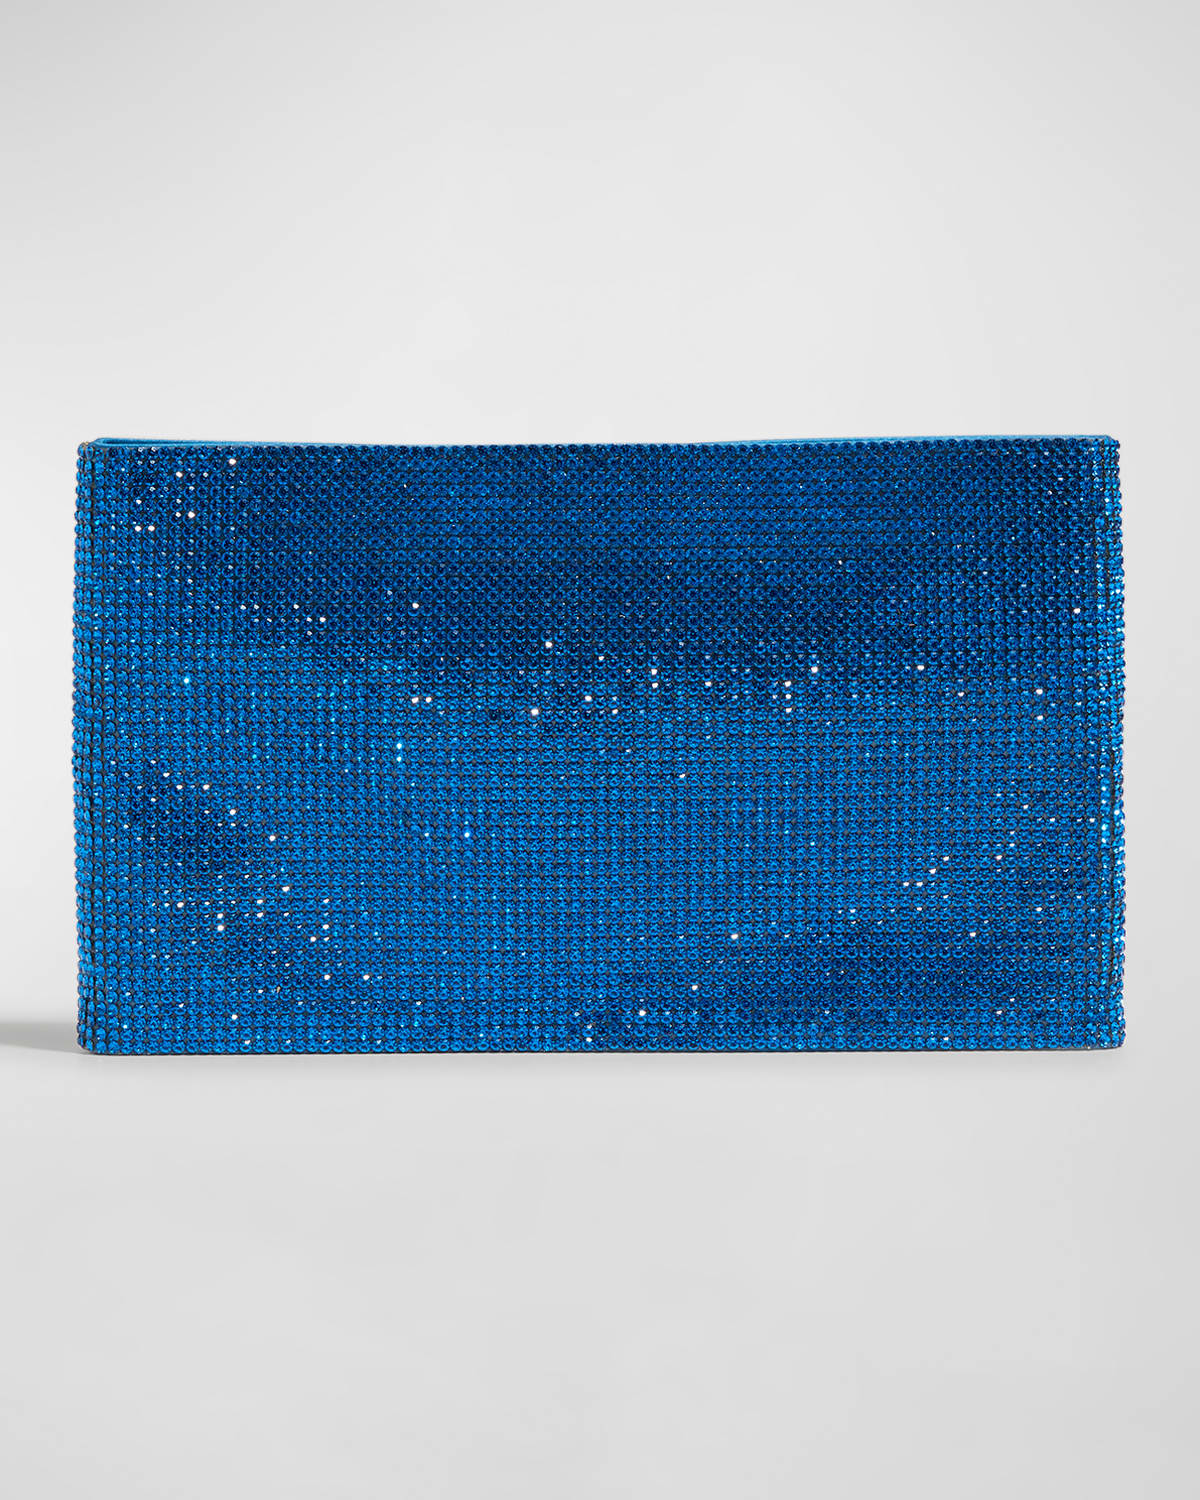 Judith Leiber Allover Crystal Zip Pouch Clutch Bag In Champ Agne Pr